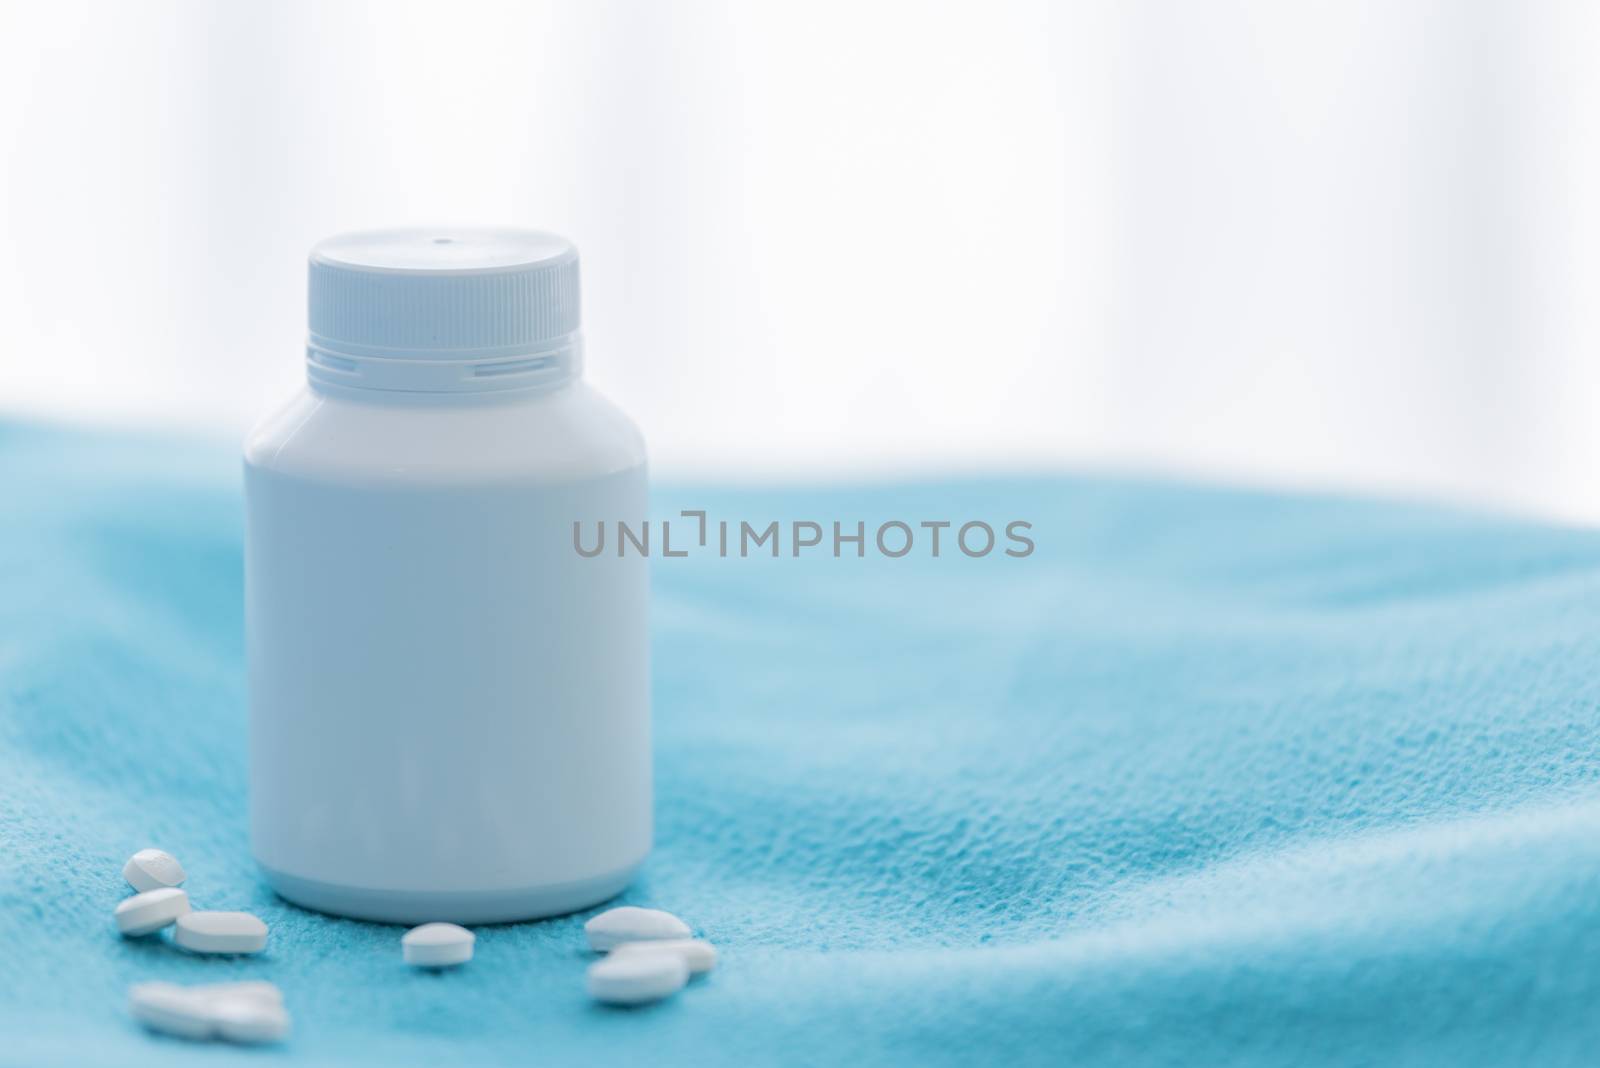 A white medicine bottle and medicine drop on the green bed sheet.